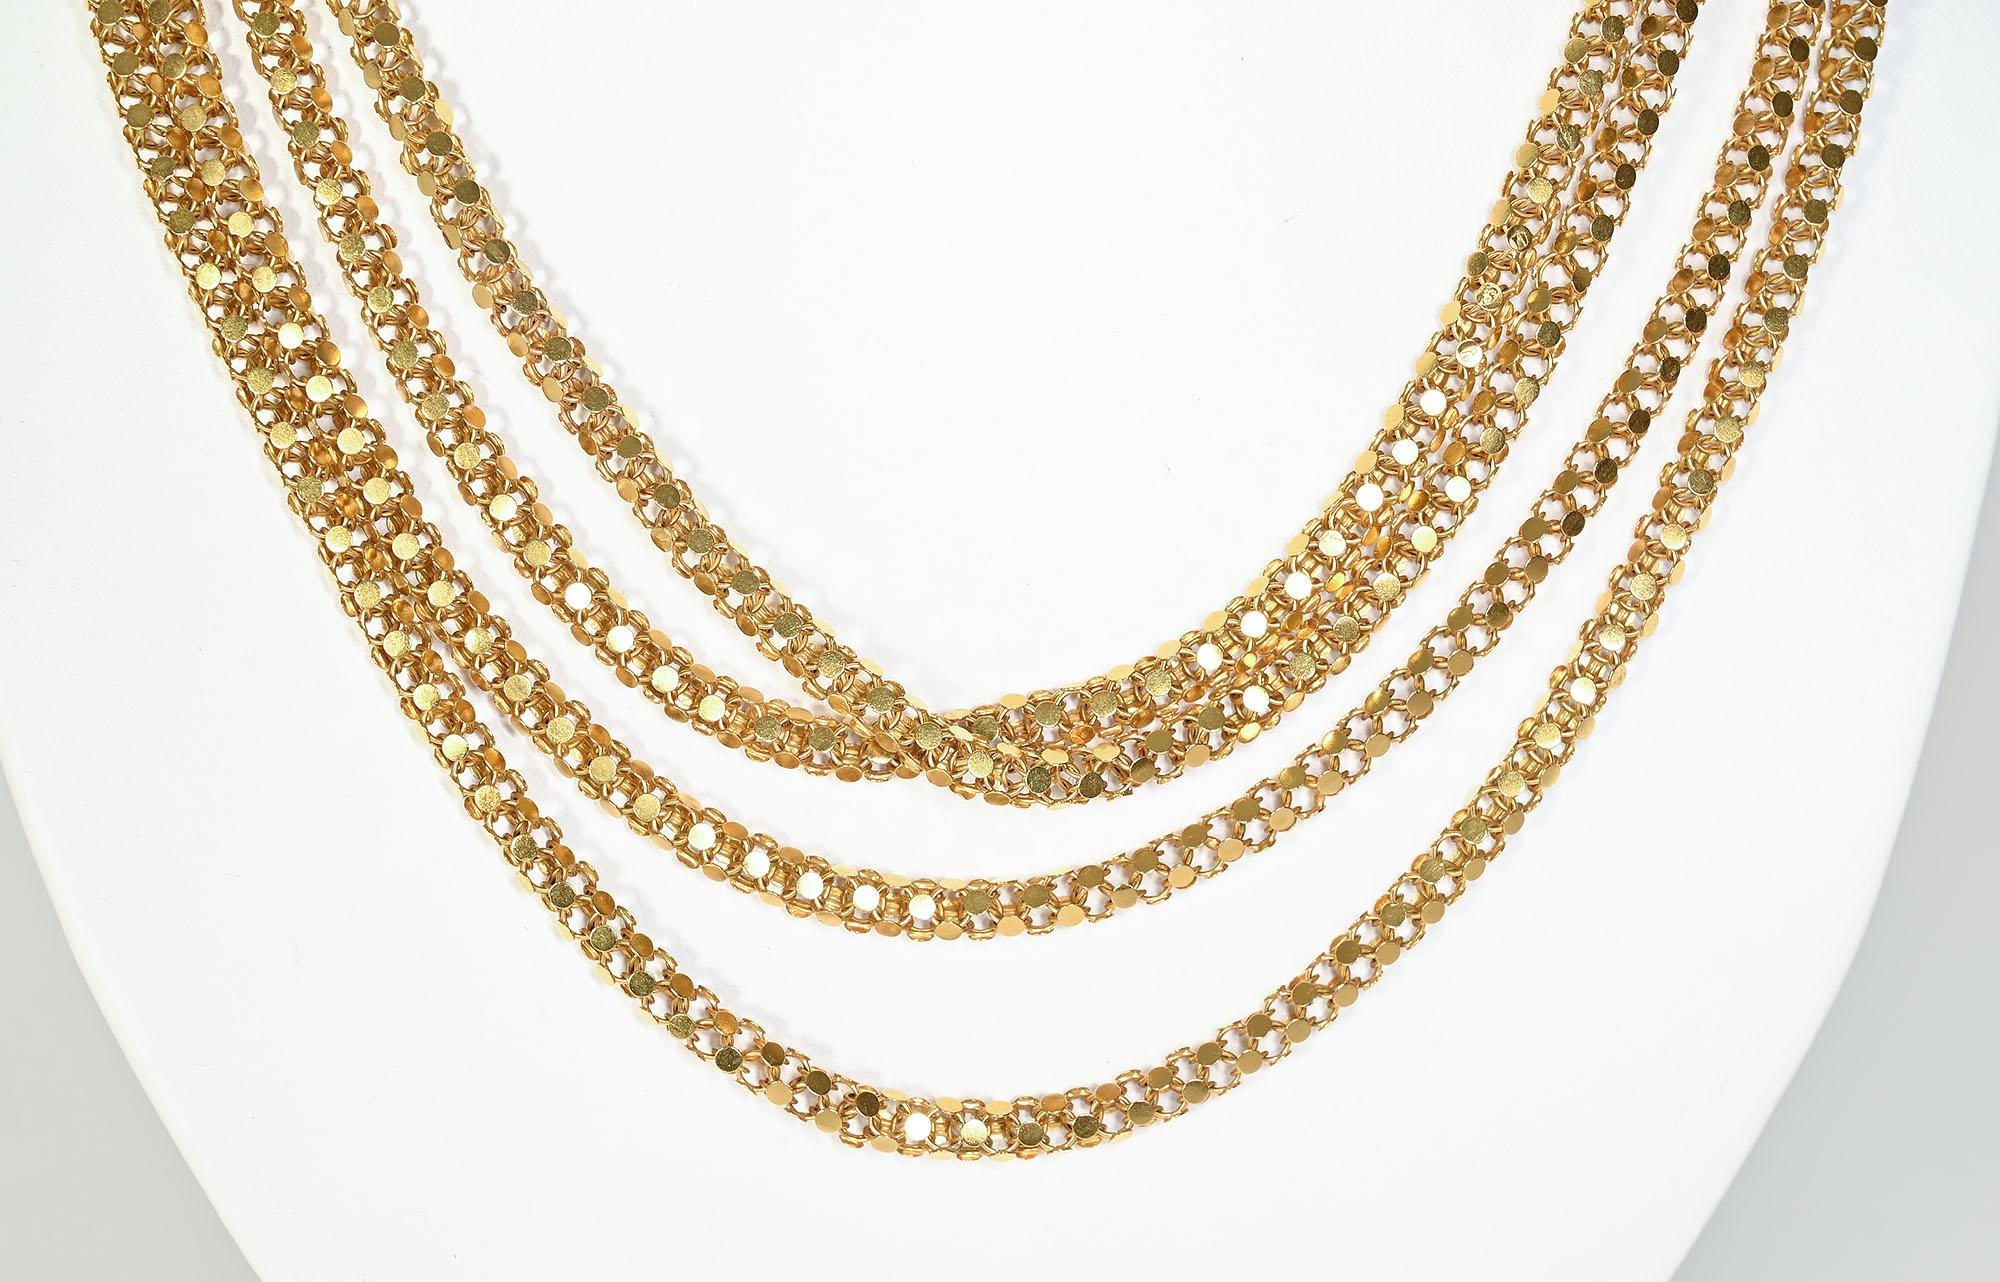 Women's or Men's Handmade Long Gold Chain Necklace For Sale